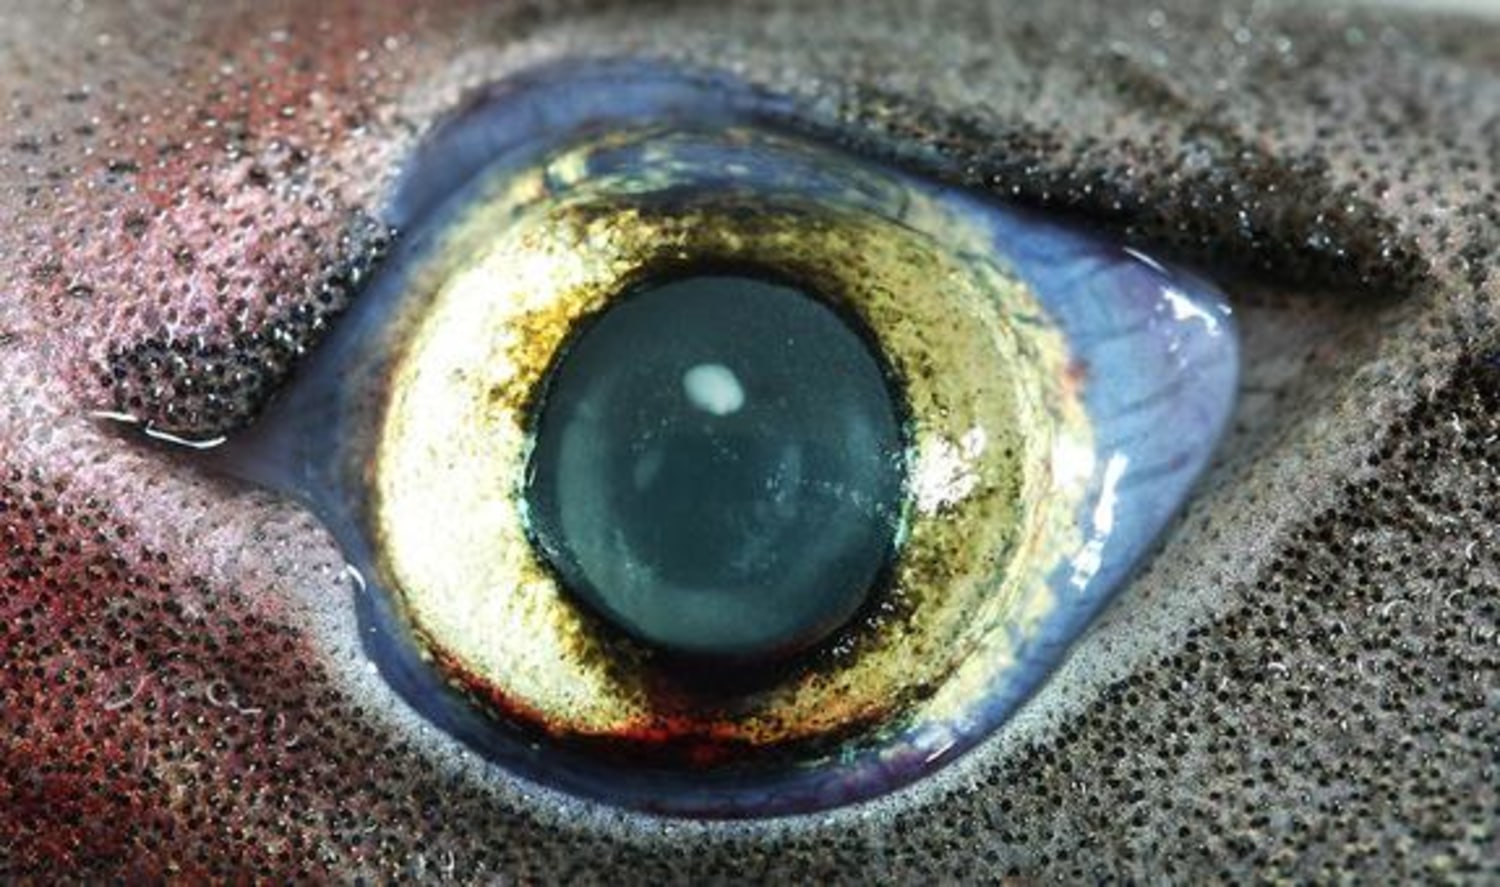 Twilight Zone: Glow-in-the-Dark Sharks Have Special Eyes to See